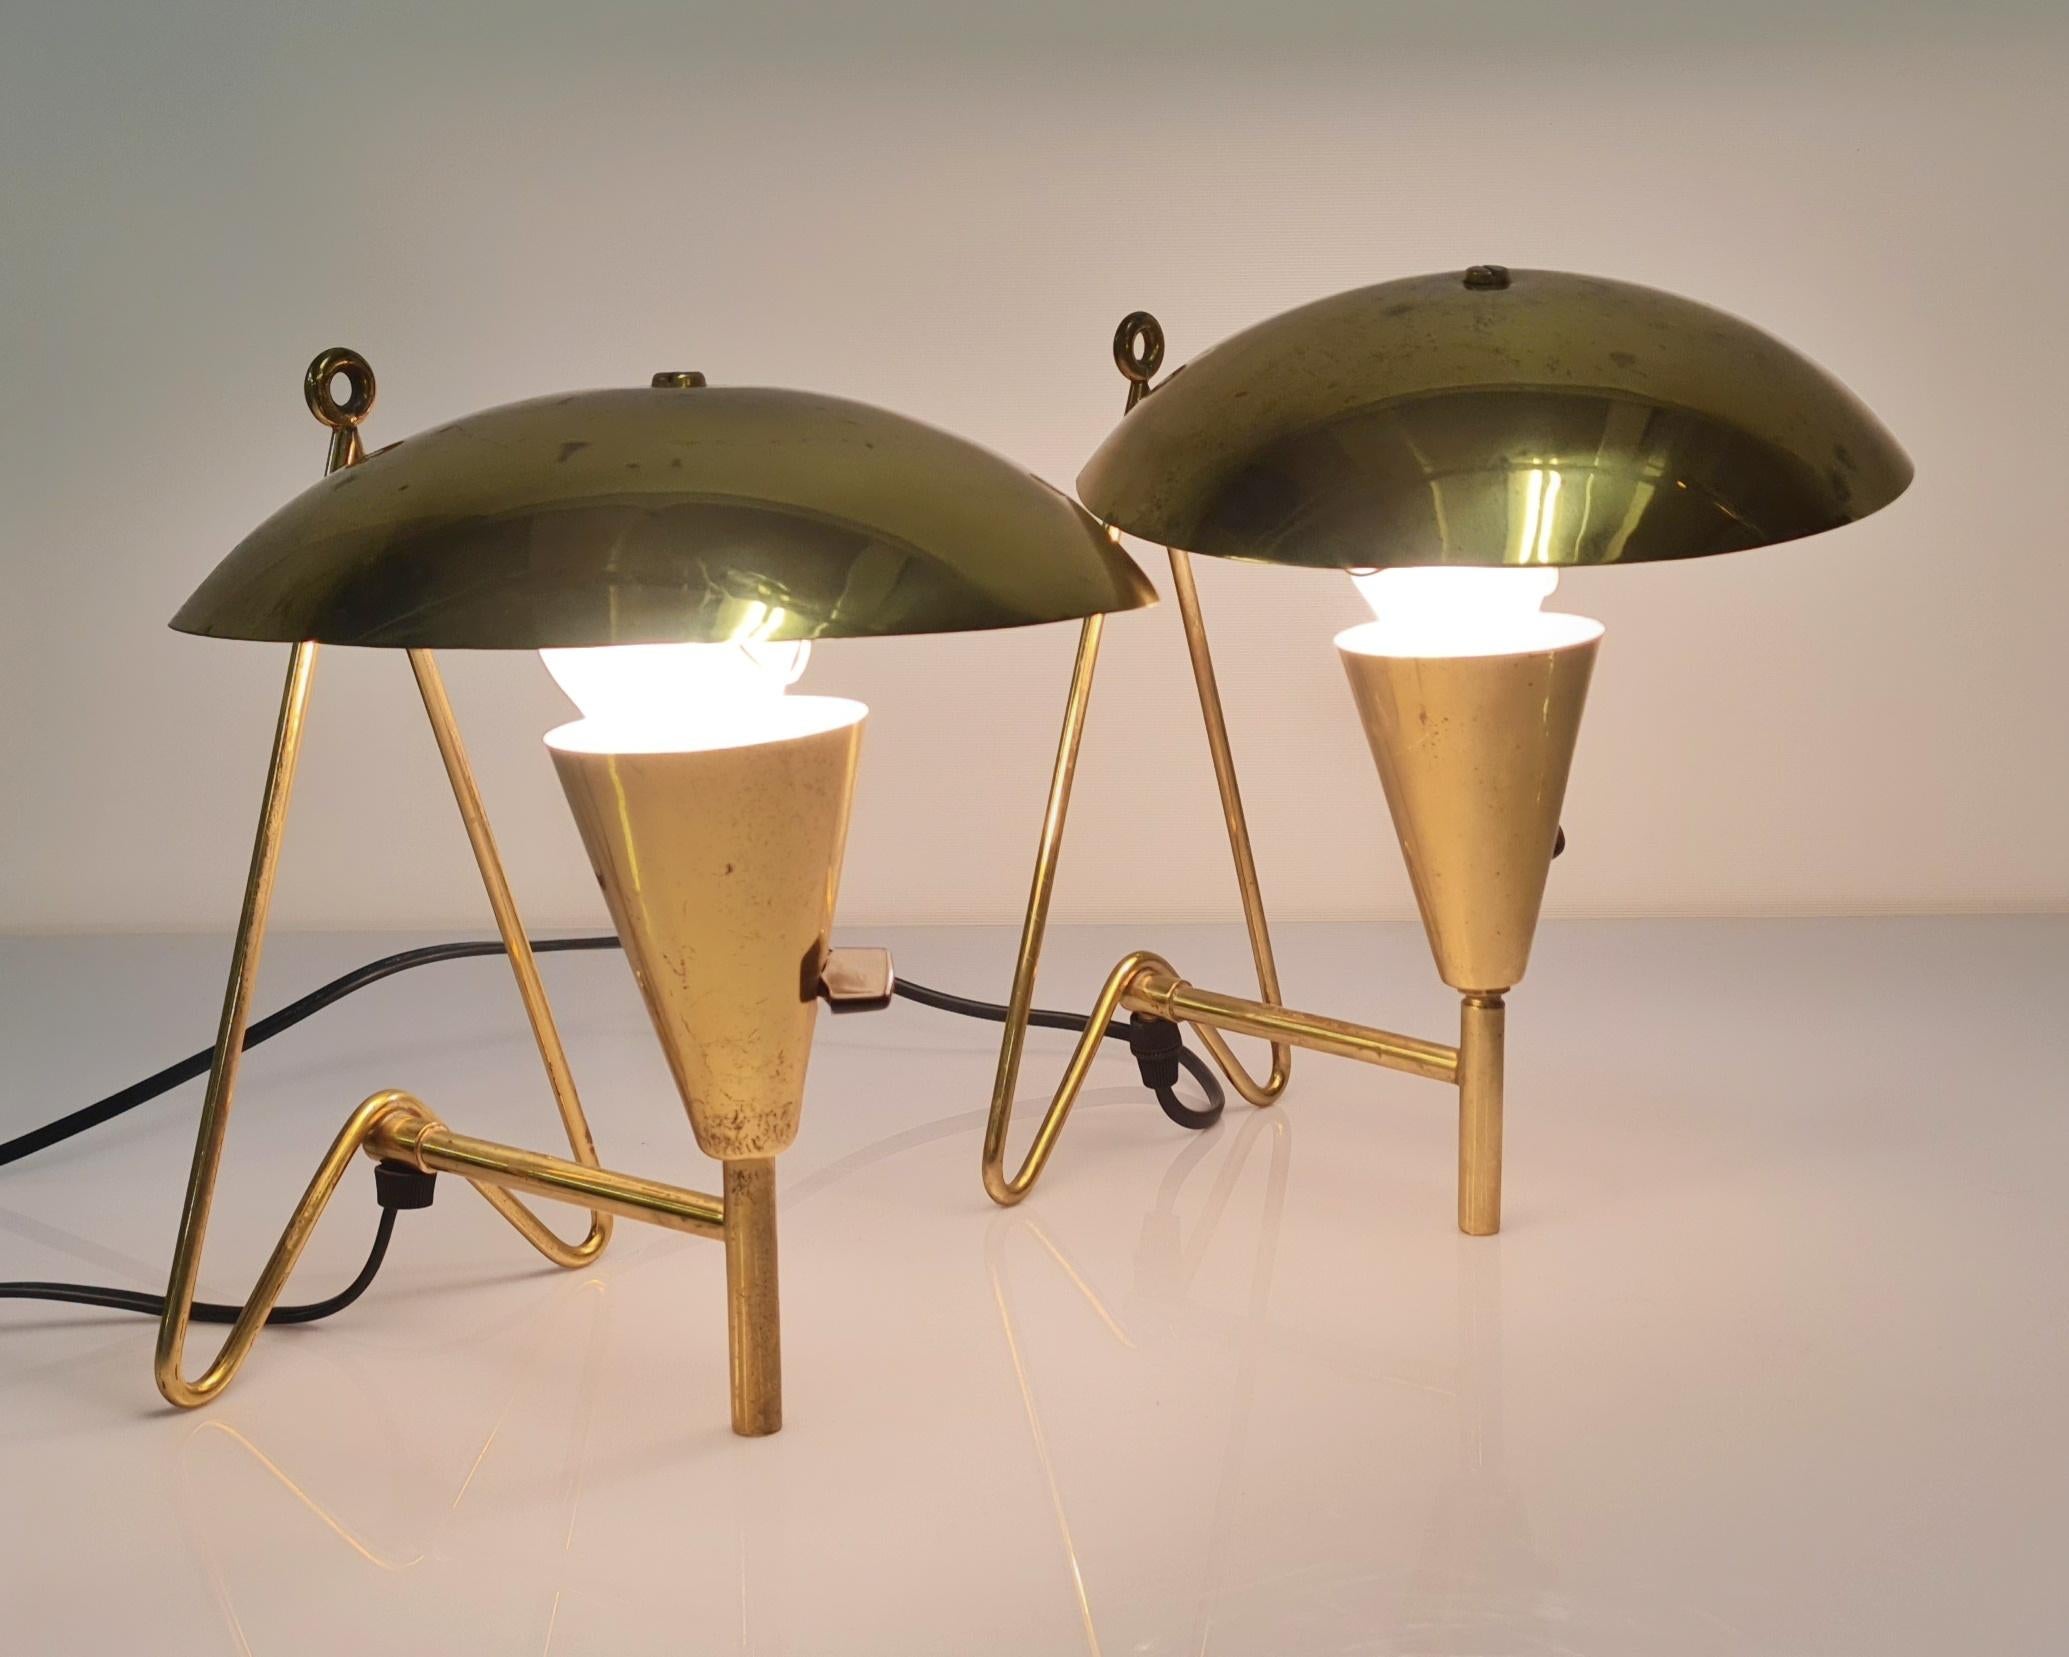 A nice pair of table lamps in full brass, made by Itsu in Finland in the 1950s. The very distinct design and the full brass body make the lamps stand out. Both lamps are in good original condition with some lite patina. 

Itsu was one of the leading